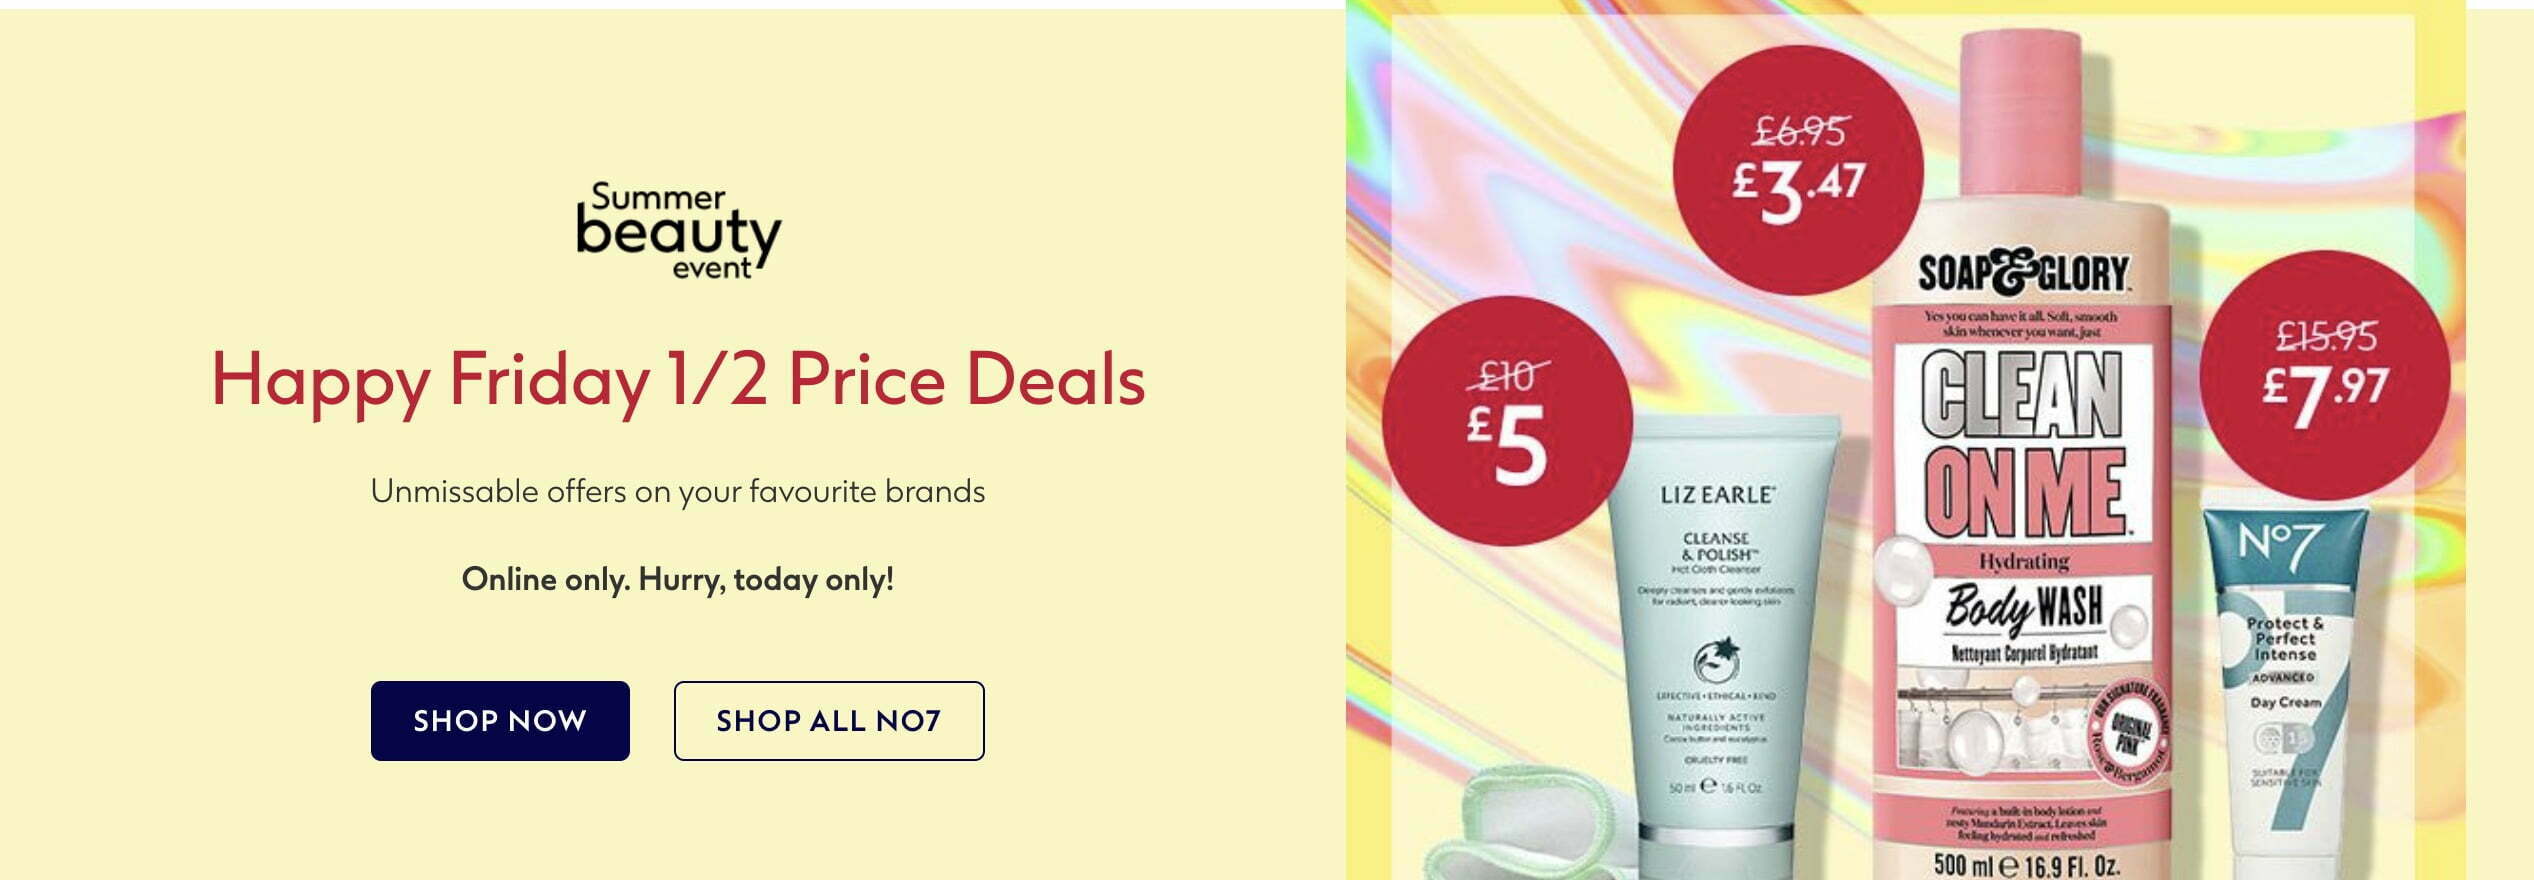 Offers At Boots